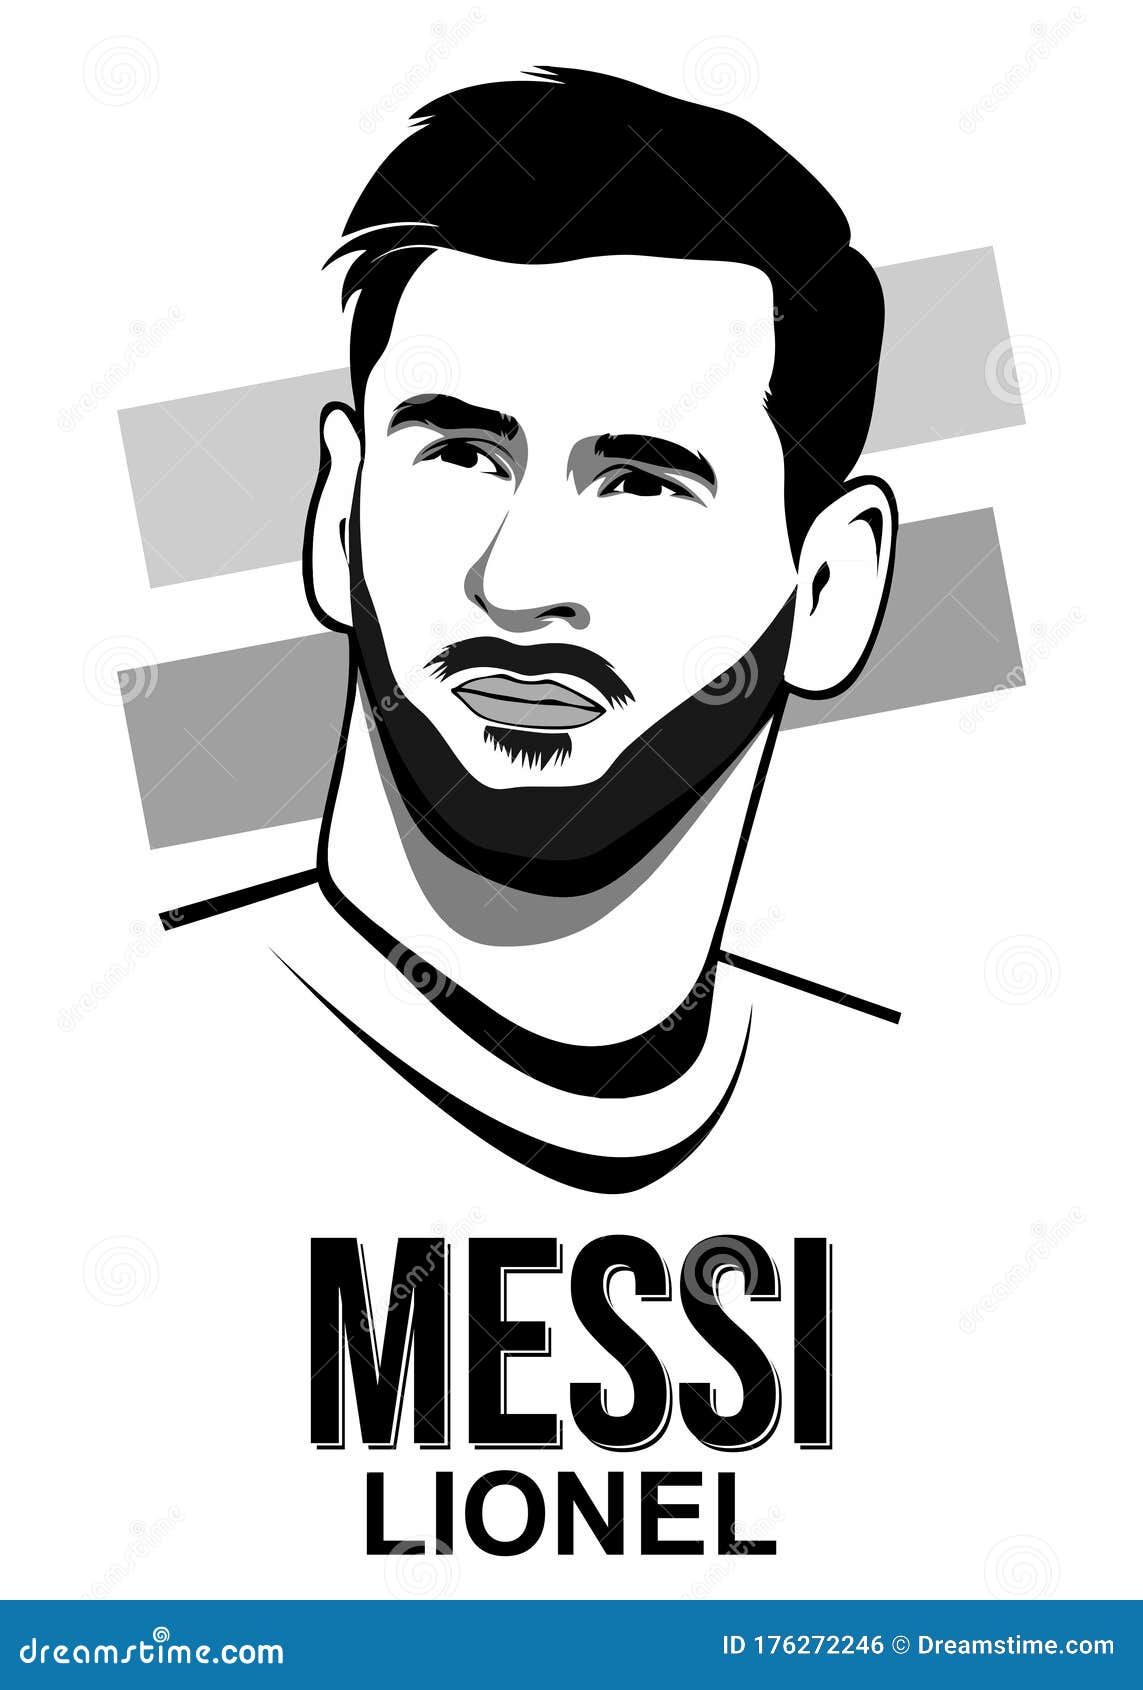 Drawing Lionel Messi | Drawings, Lionel messi, Watercolor paintings